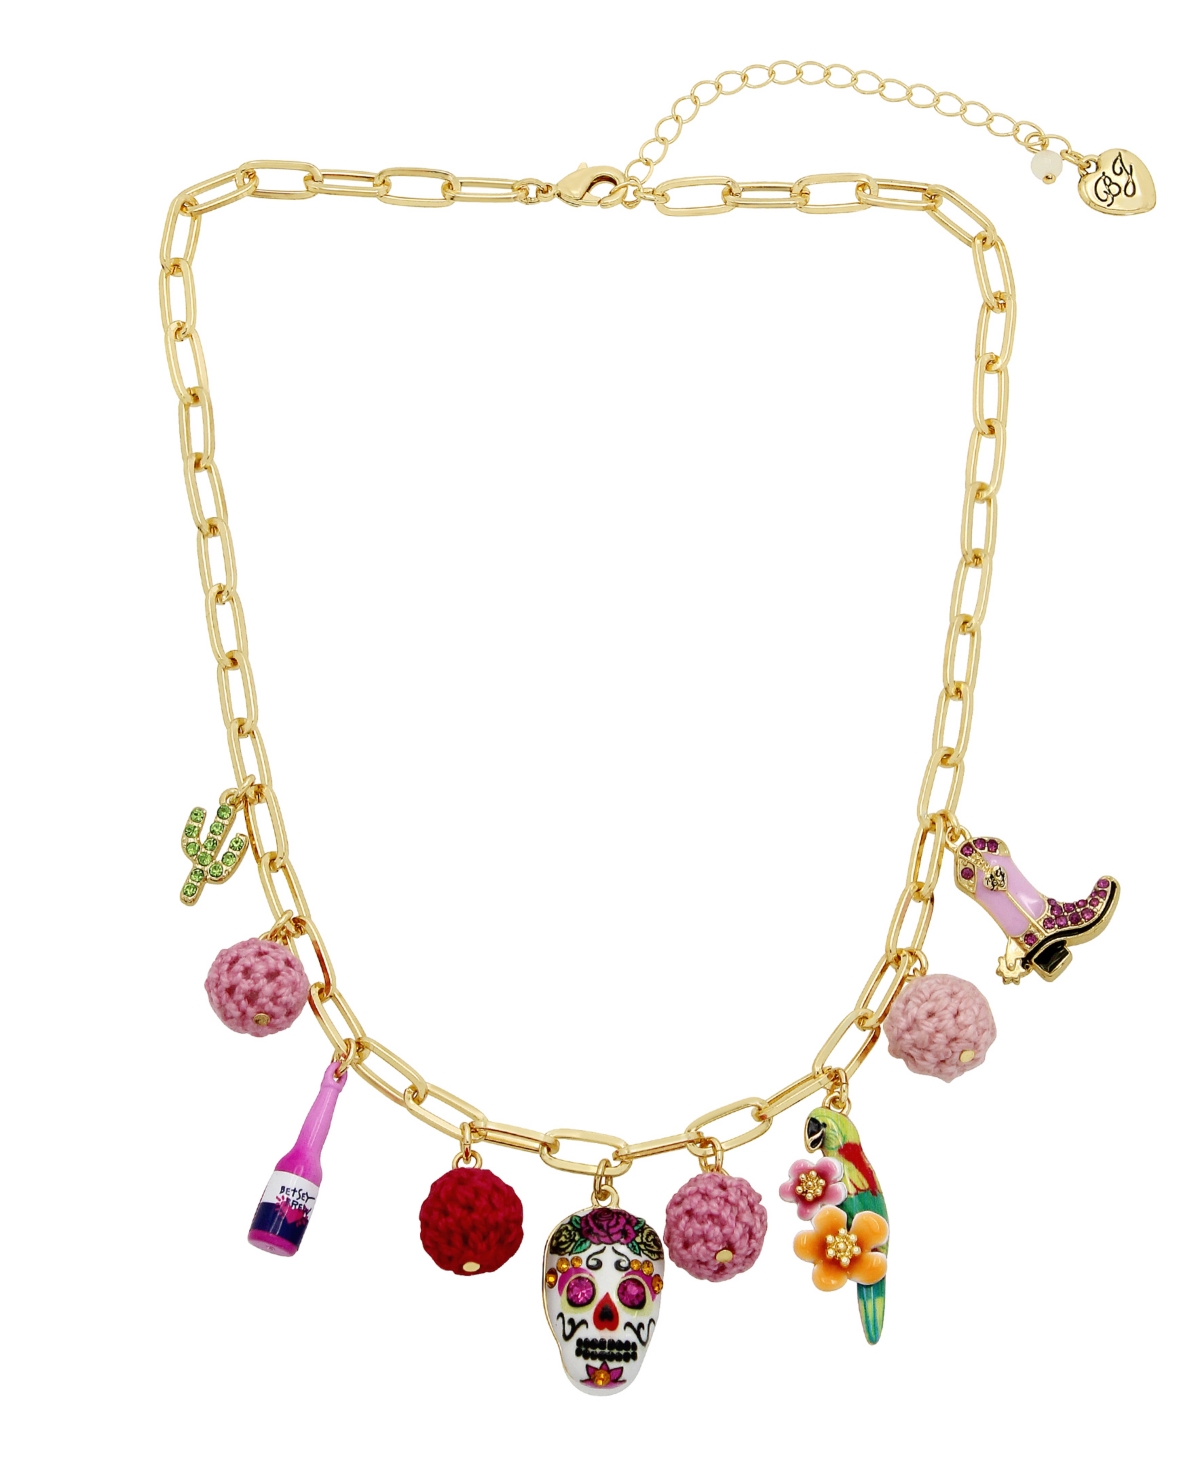 Betsey Johnson Faux Stone Sugar Skull Charm Bib Necklace In Pink